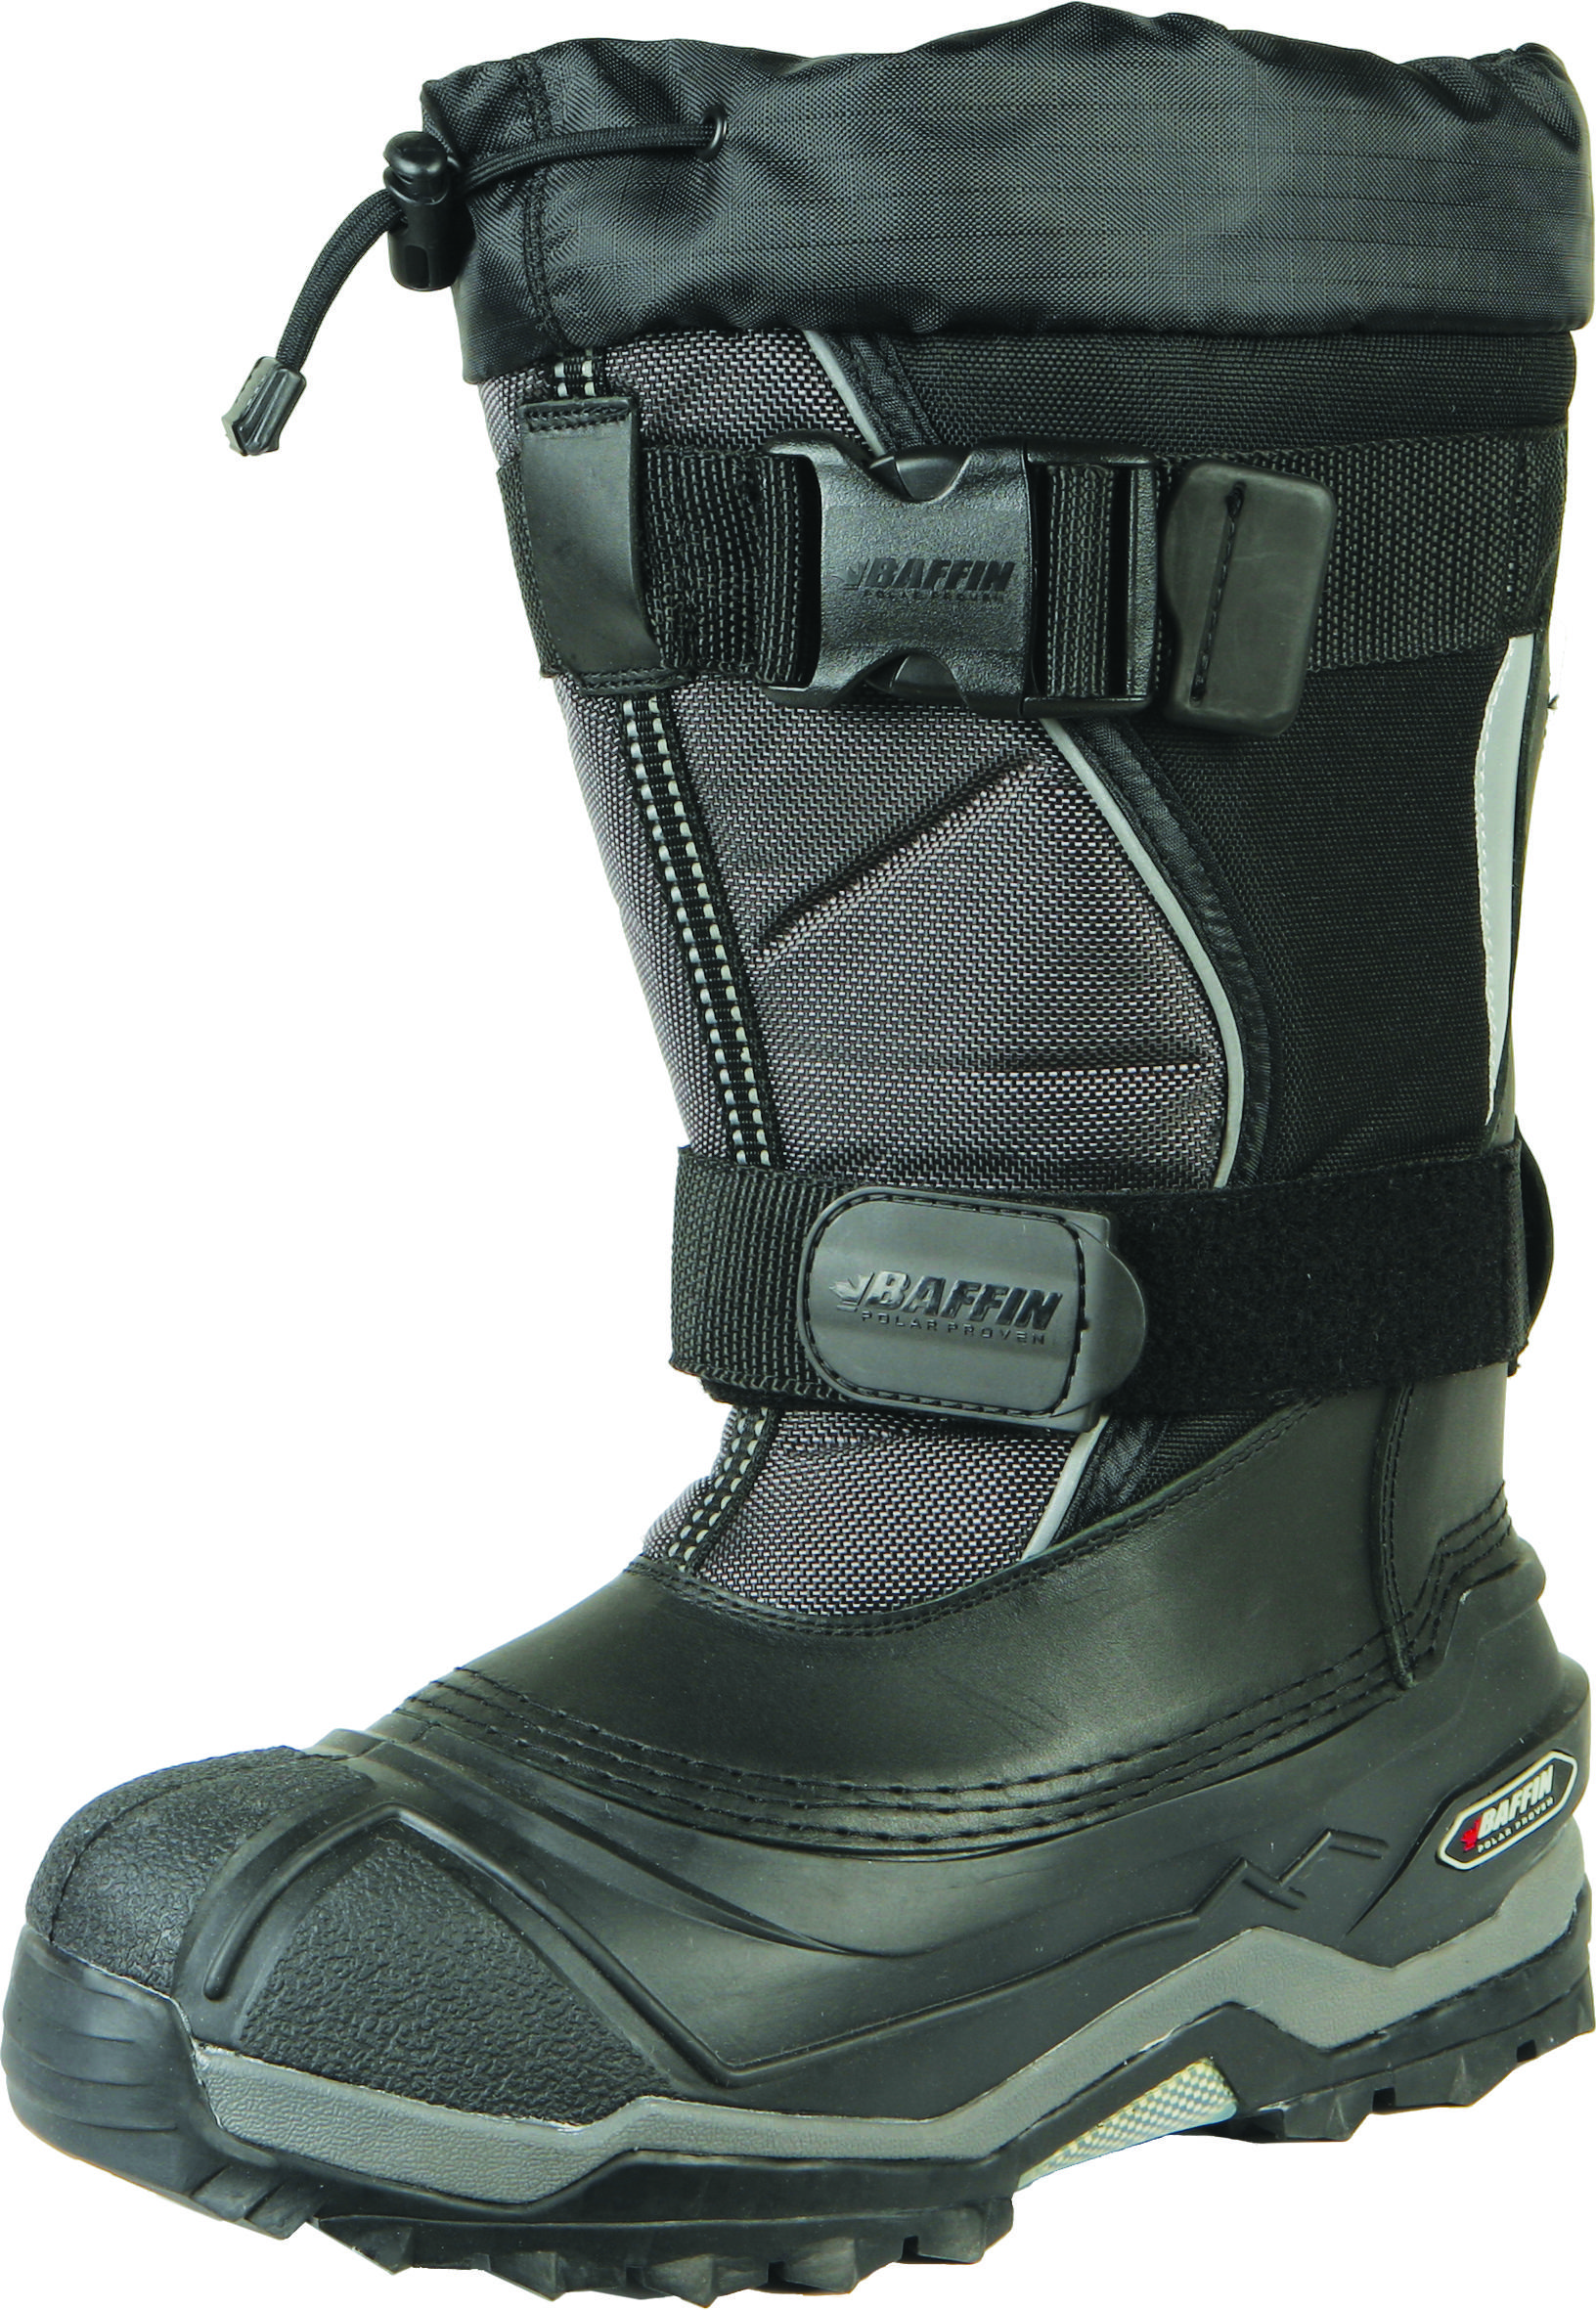 Selkirk Boots Black US 07 - Click Image to Close